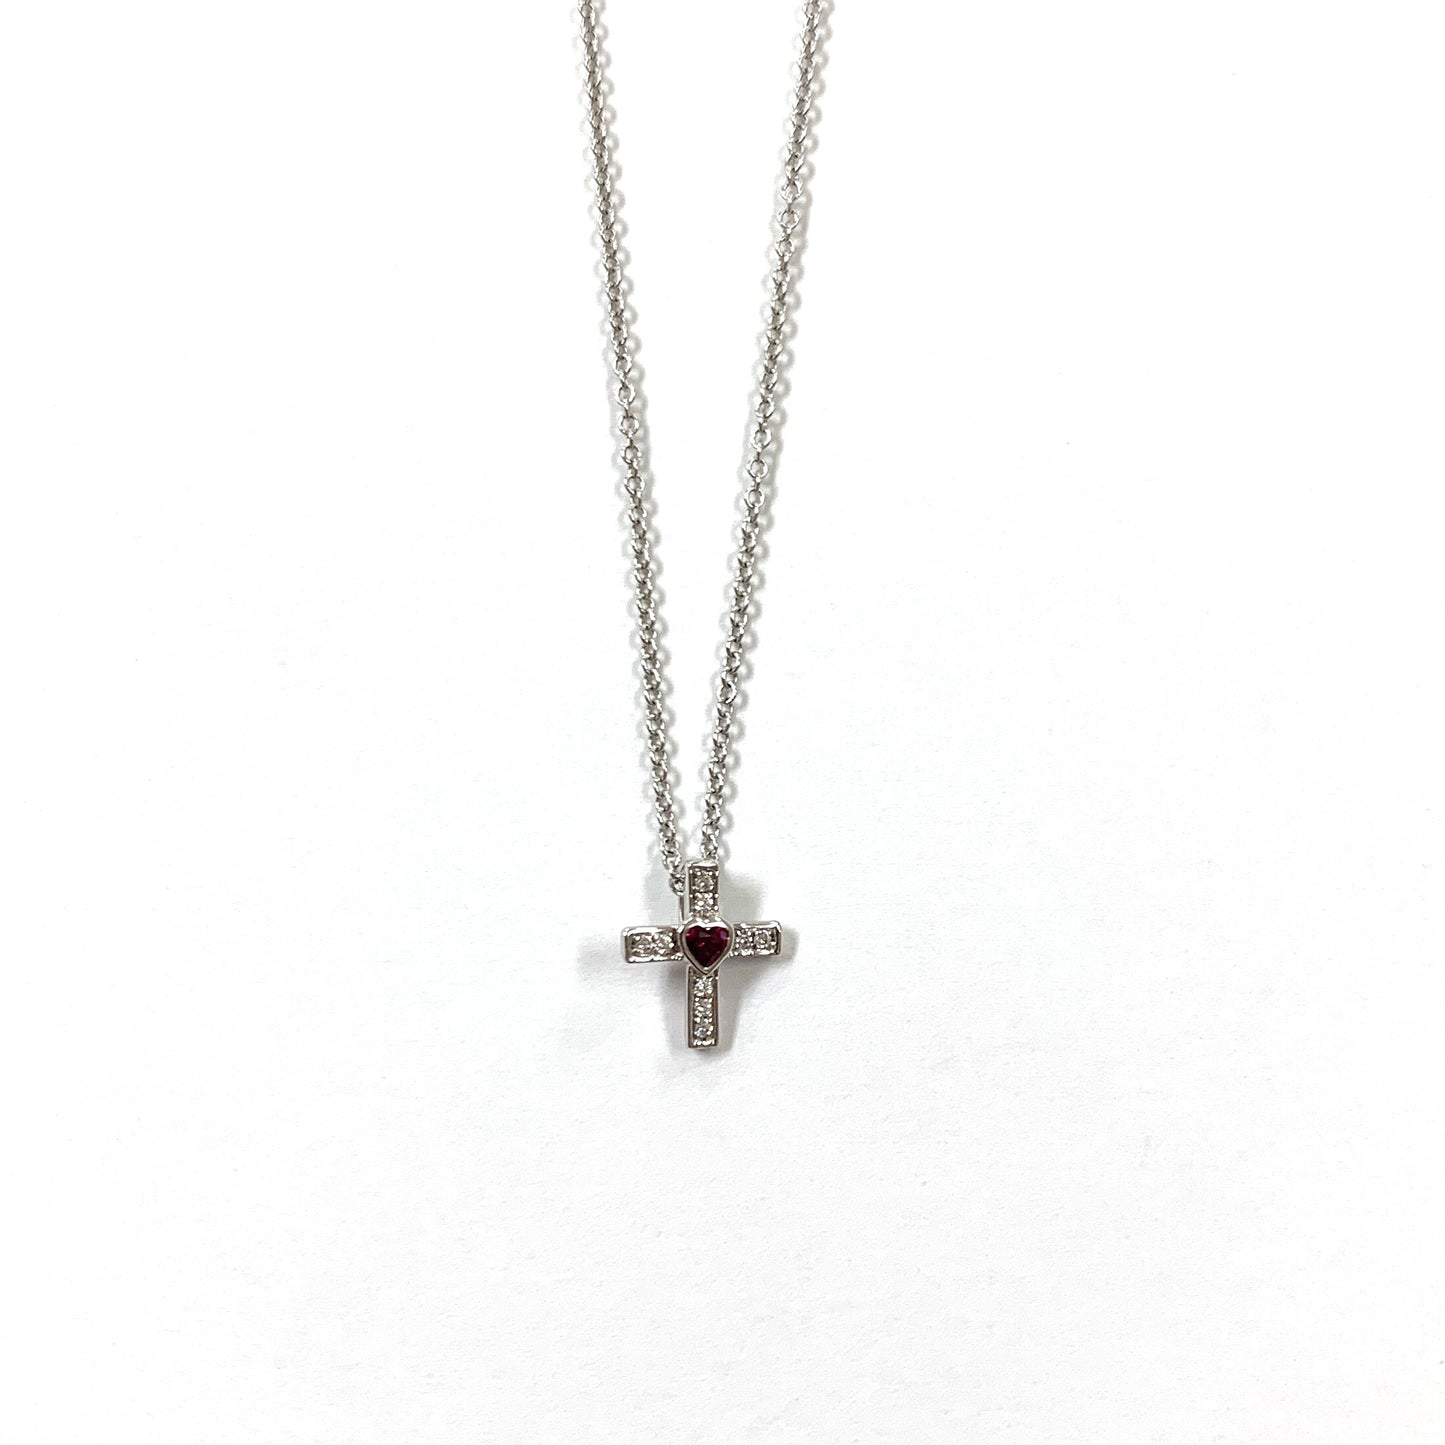 Diamond and Silver Cross Necklace with Heart